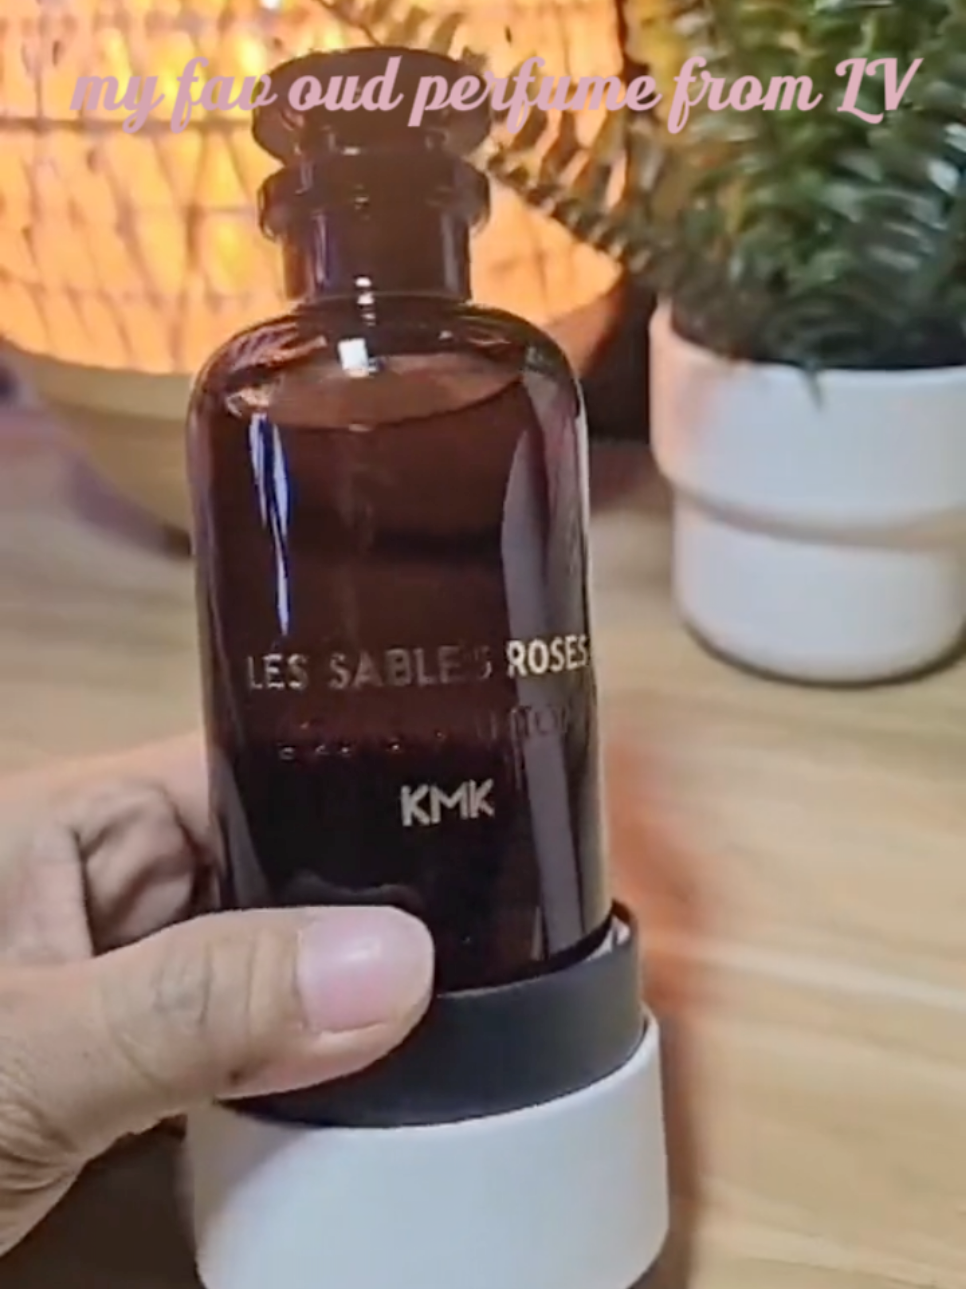 Les Sables Roses was launched in 2019, Article posted by Kmk